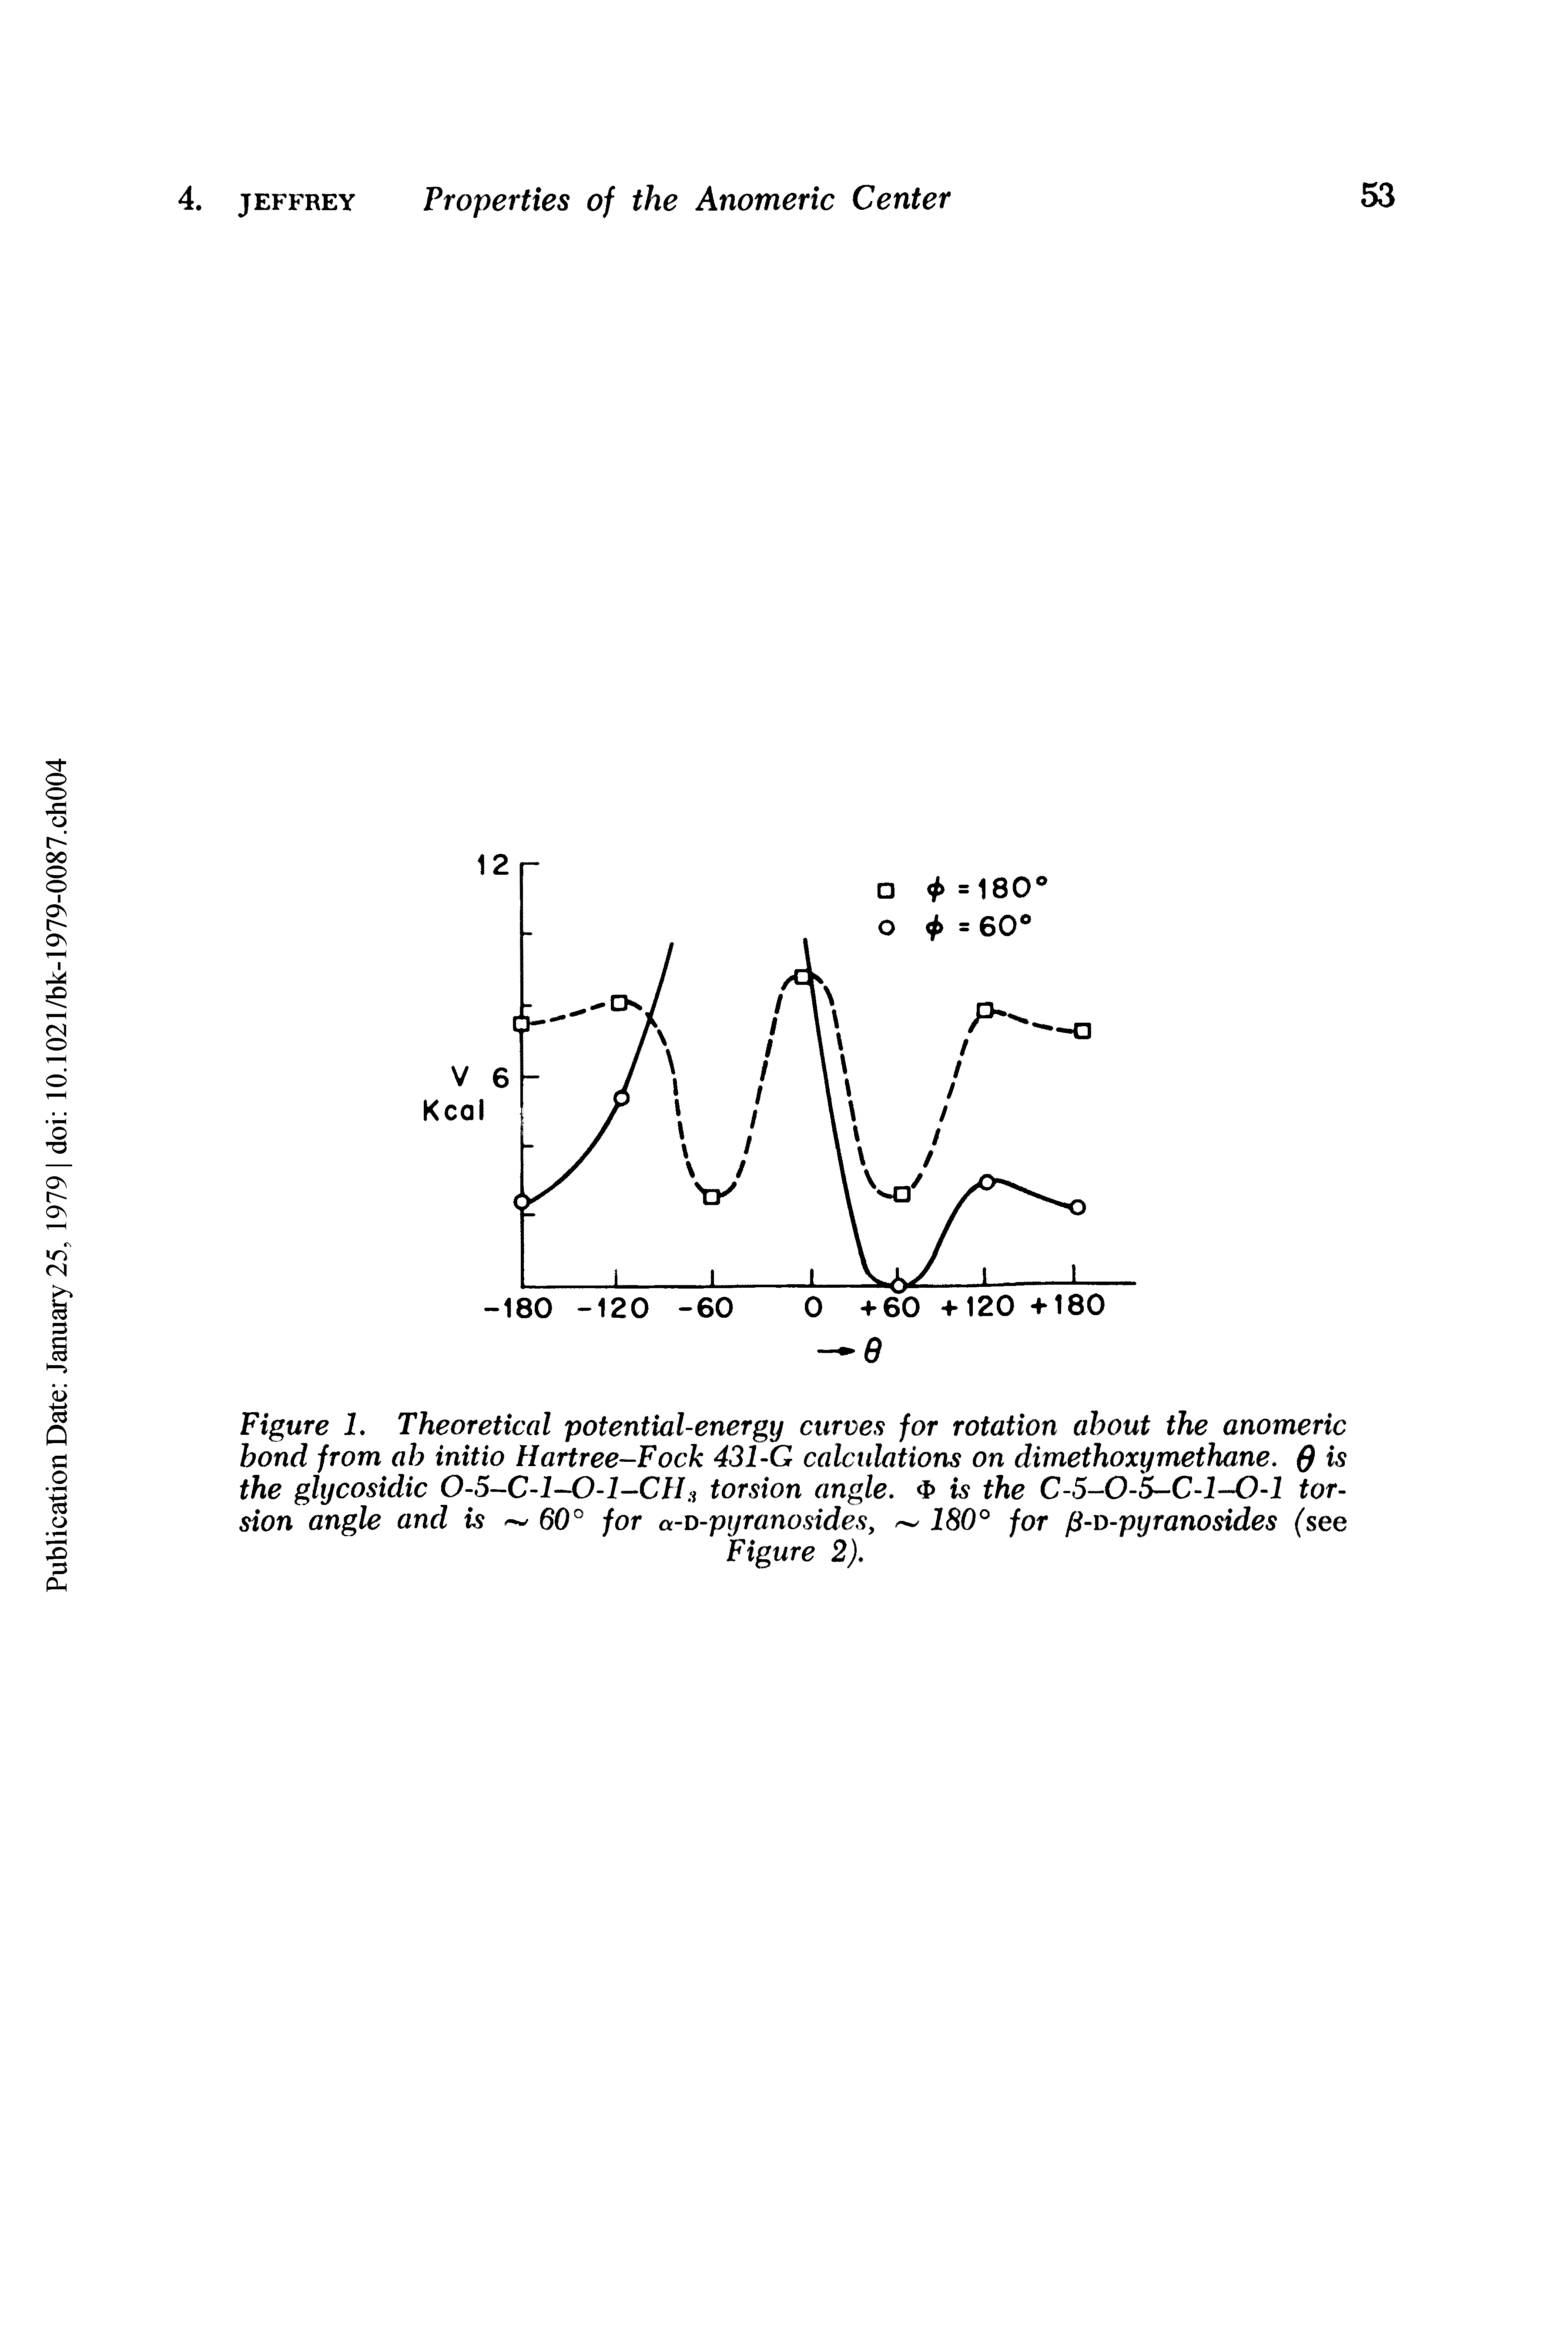 Figure 1. Theoretical potential-energy curves for rotation about the anomeric bond from ah initio Hartree-Fock 431-G calculations on dimethoxymethane. is the glycosidic O-5-C-l-O-l-CH i torsion angle. <t> is the C-5-0-5-C-1-0-1 torsion angle and is 60° for a-D-pyranosides, 180° for fl-v-pyranosides (see...